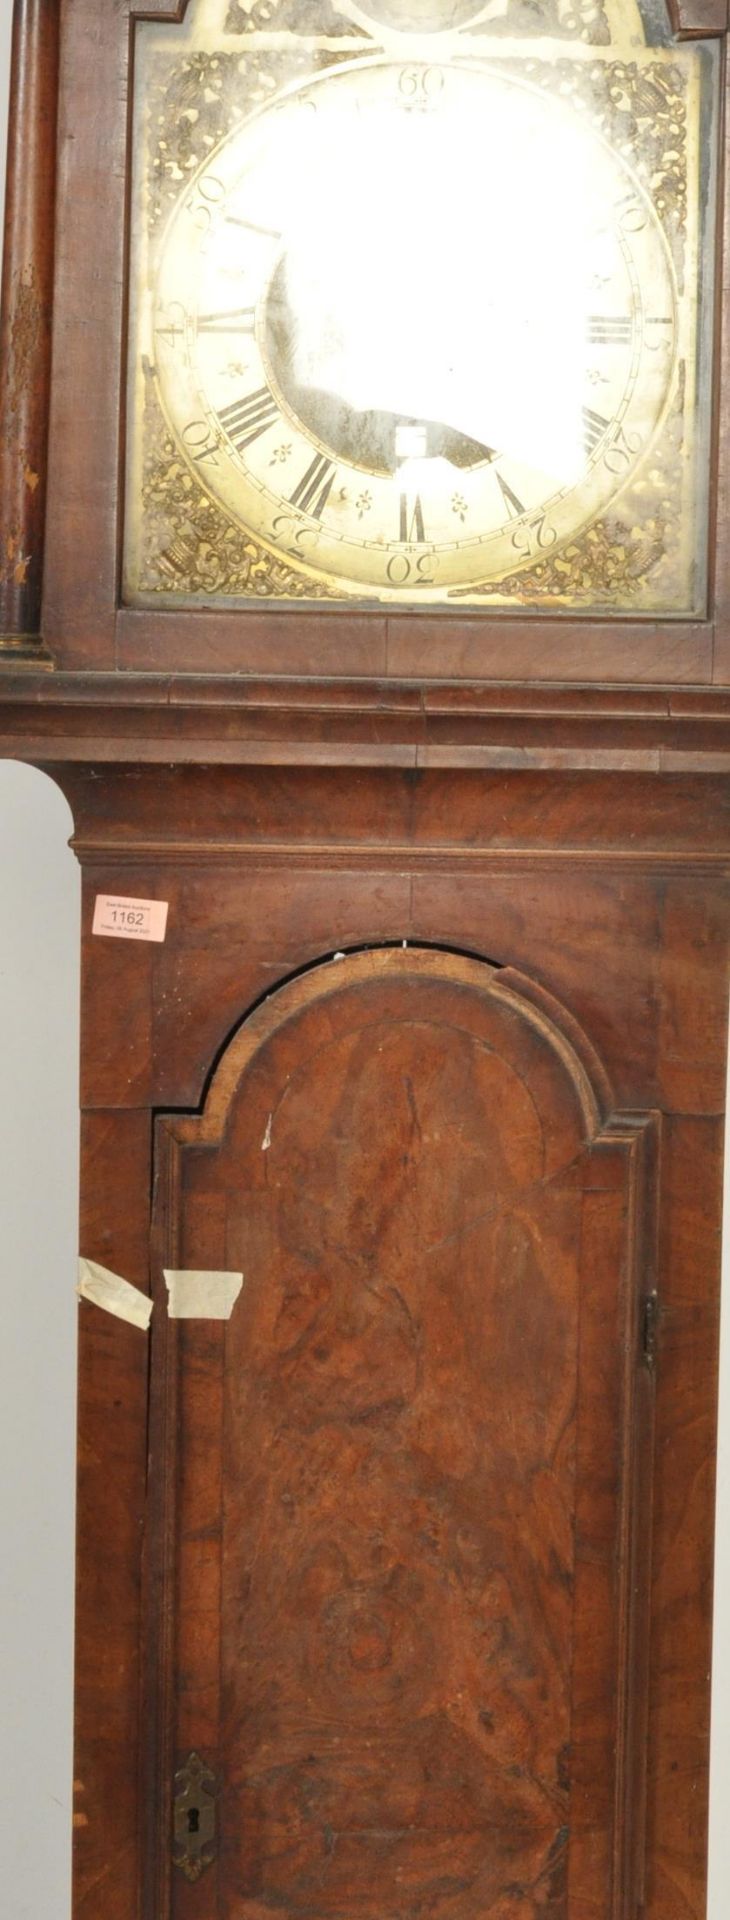 GEORGE III WALNUT LONG CASE GRANDFATHER CLOCK BY THOMAS MOORE IPSWICH - Image 3 of 6